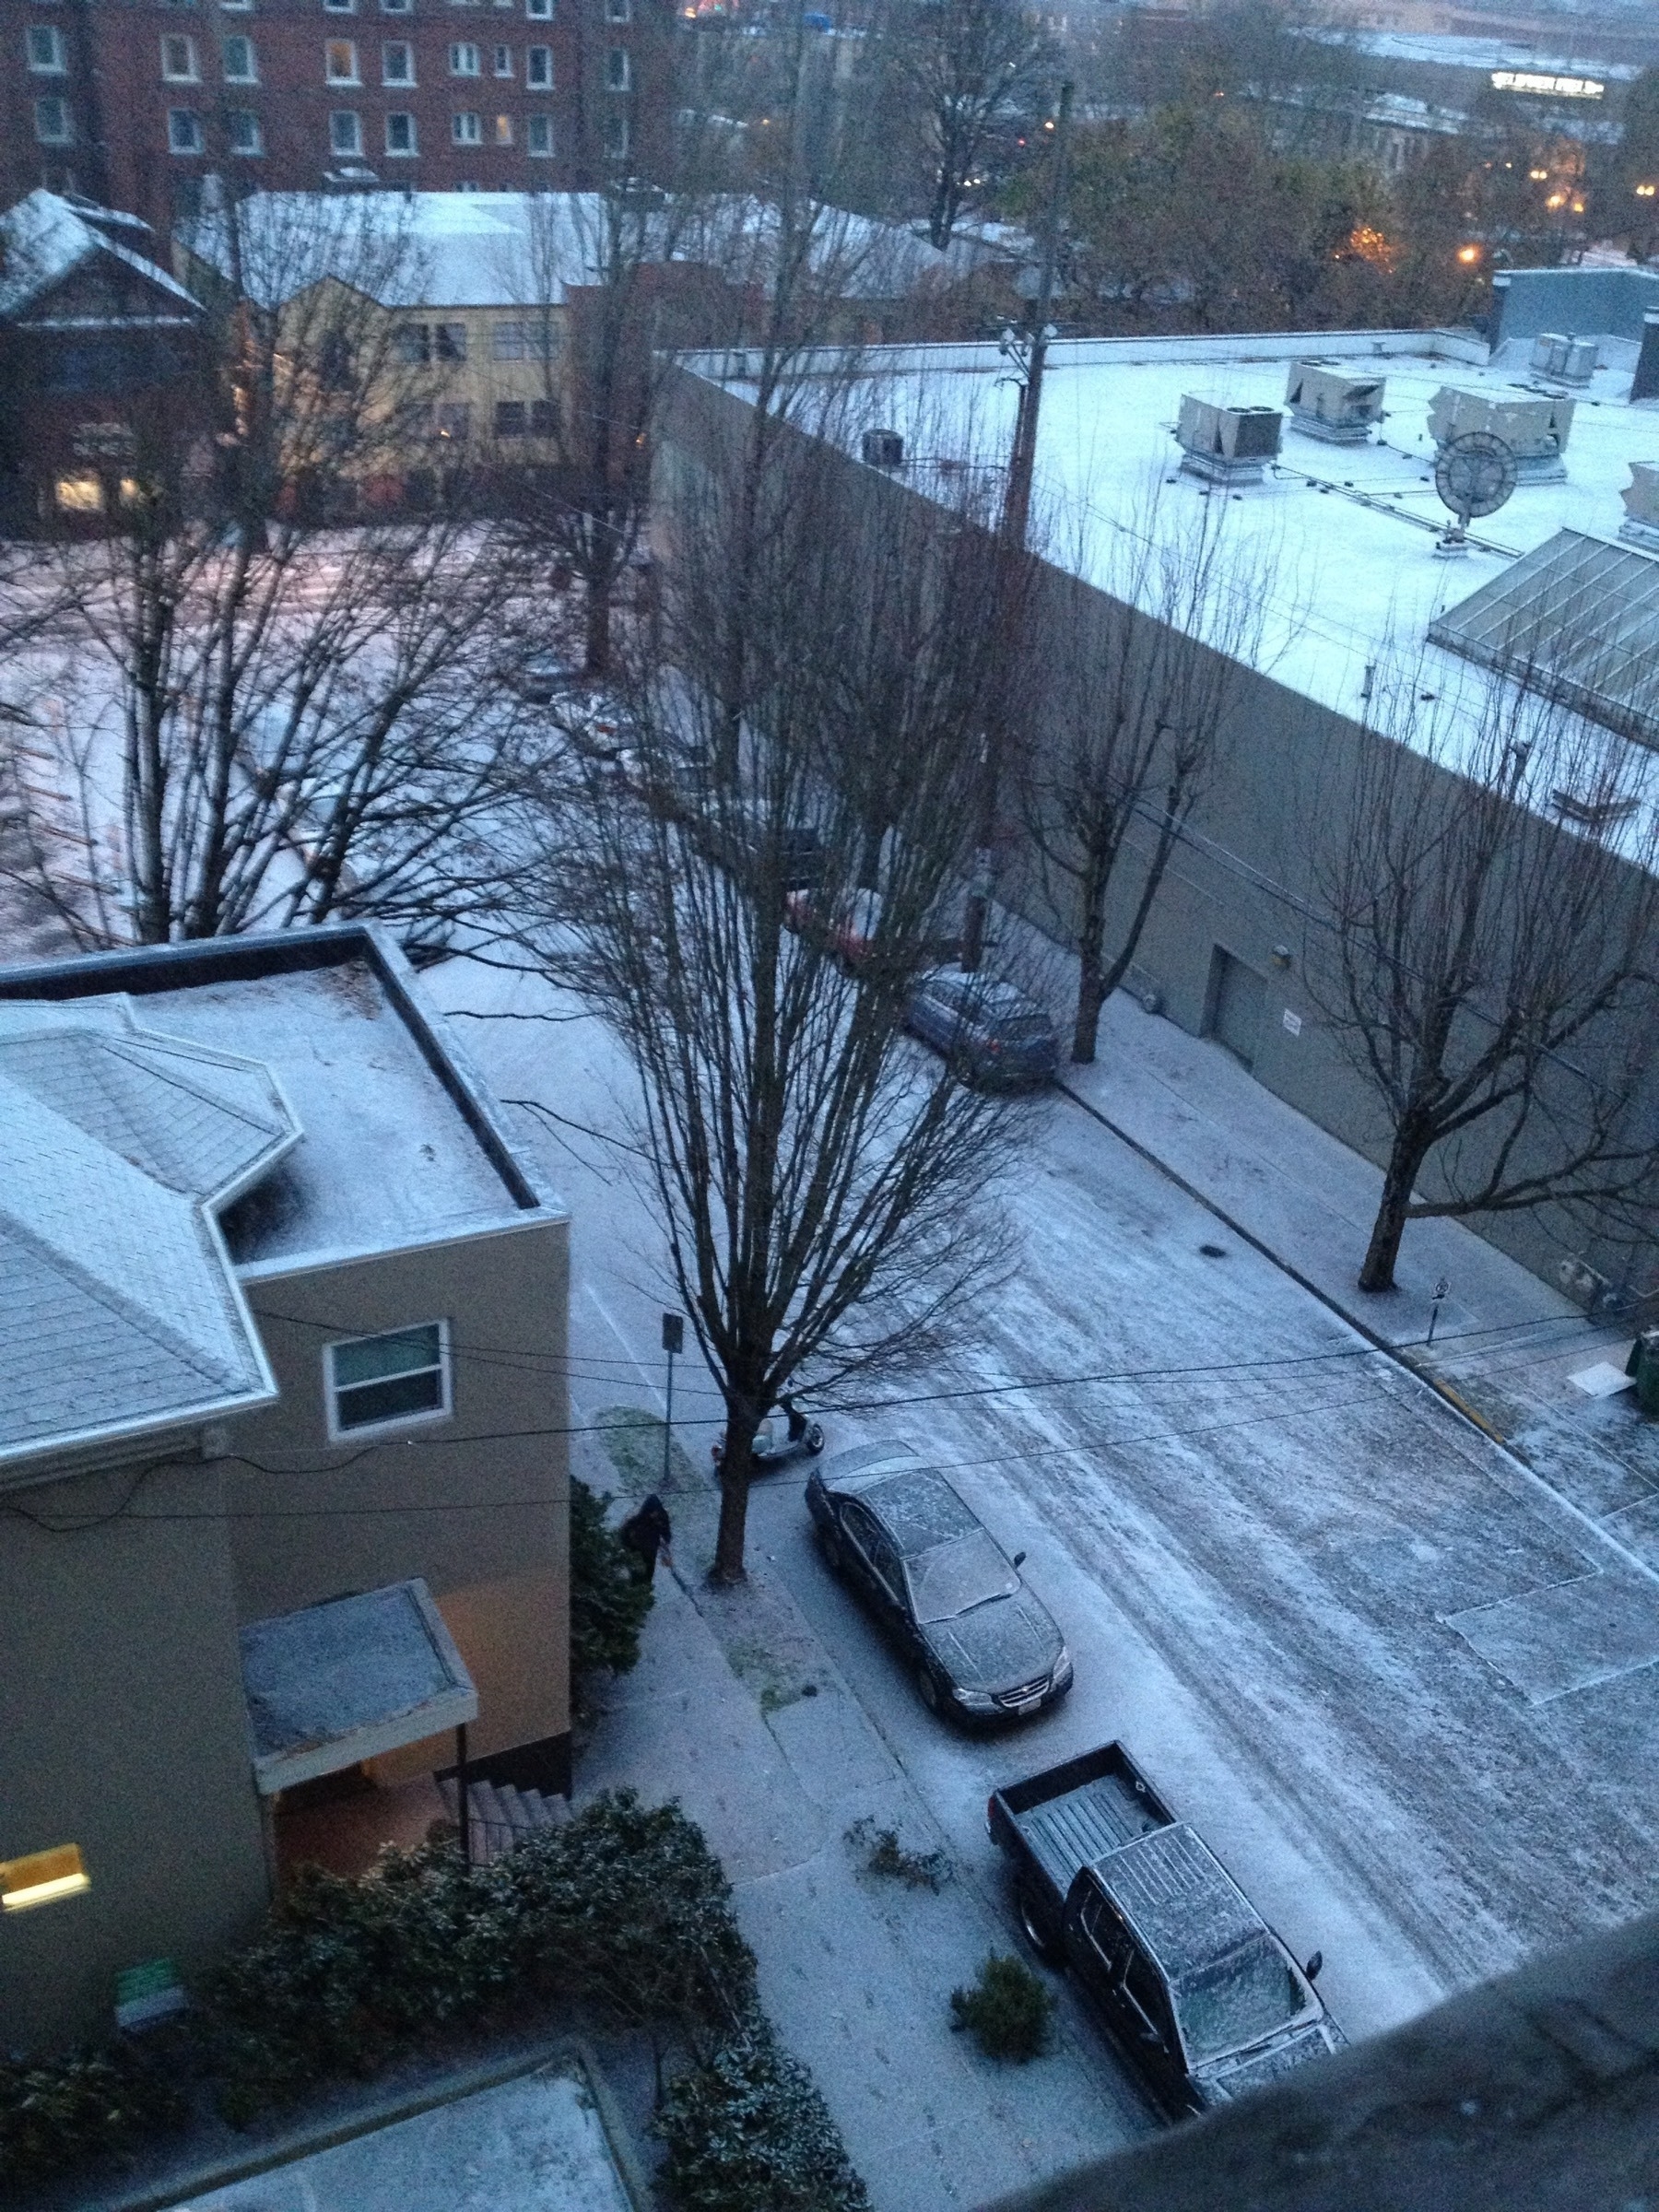 Snow on the streets of Portland, Oregon in 2013